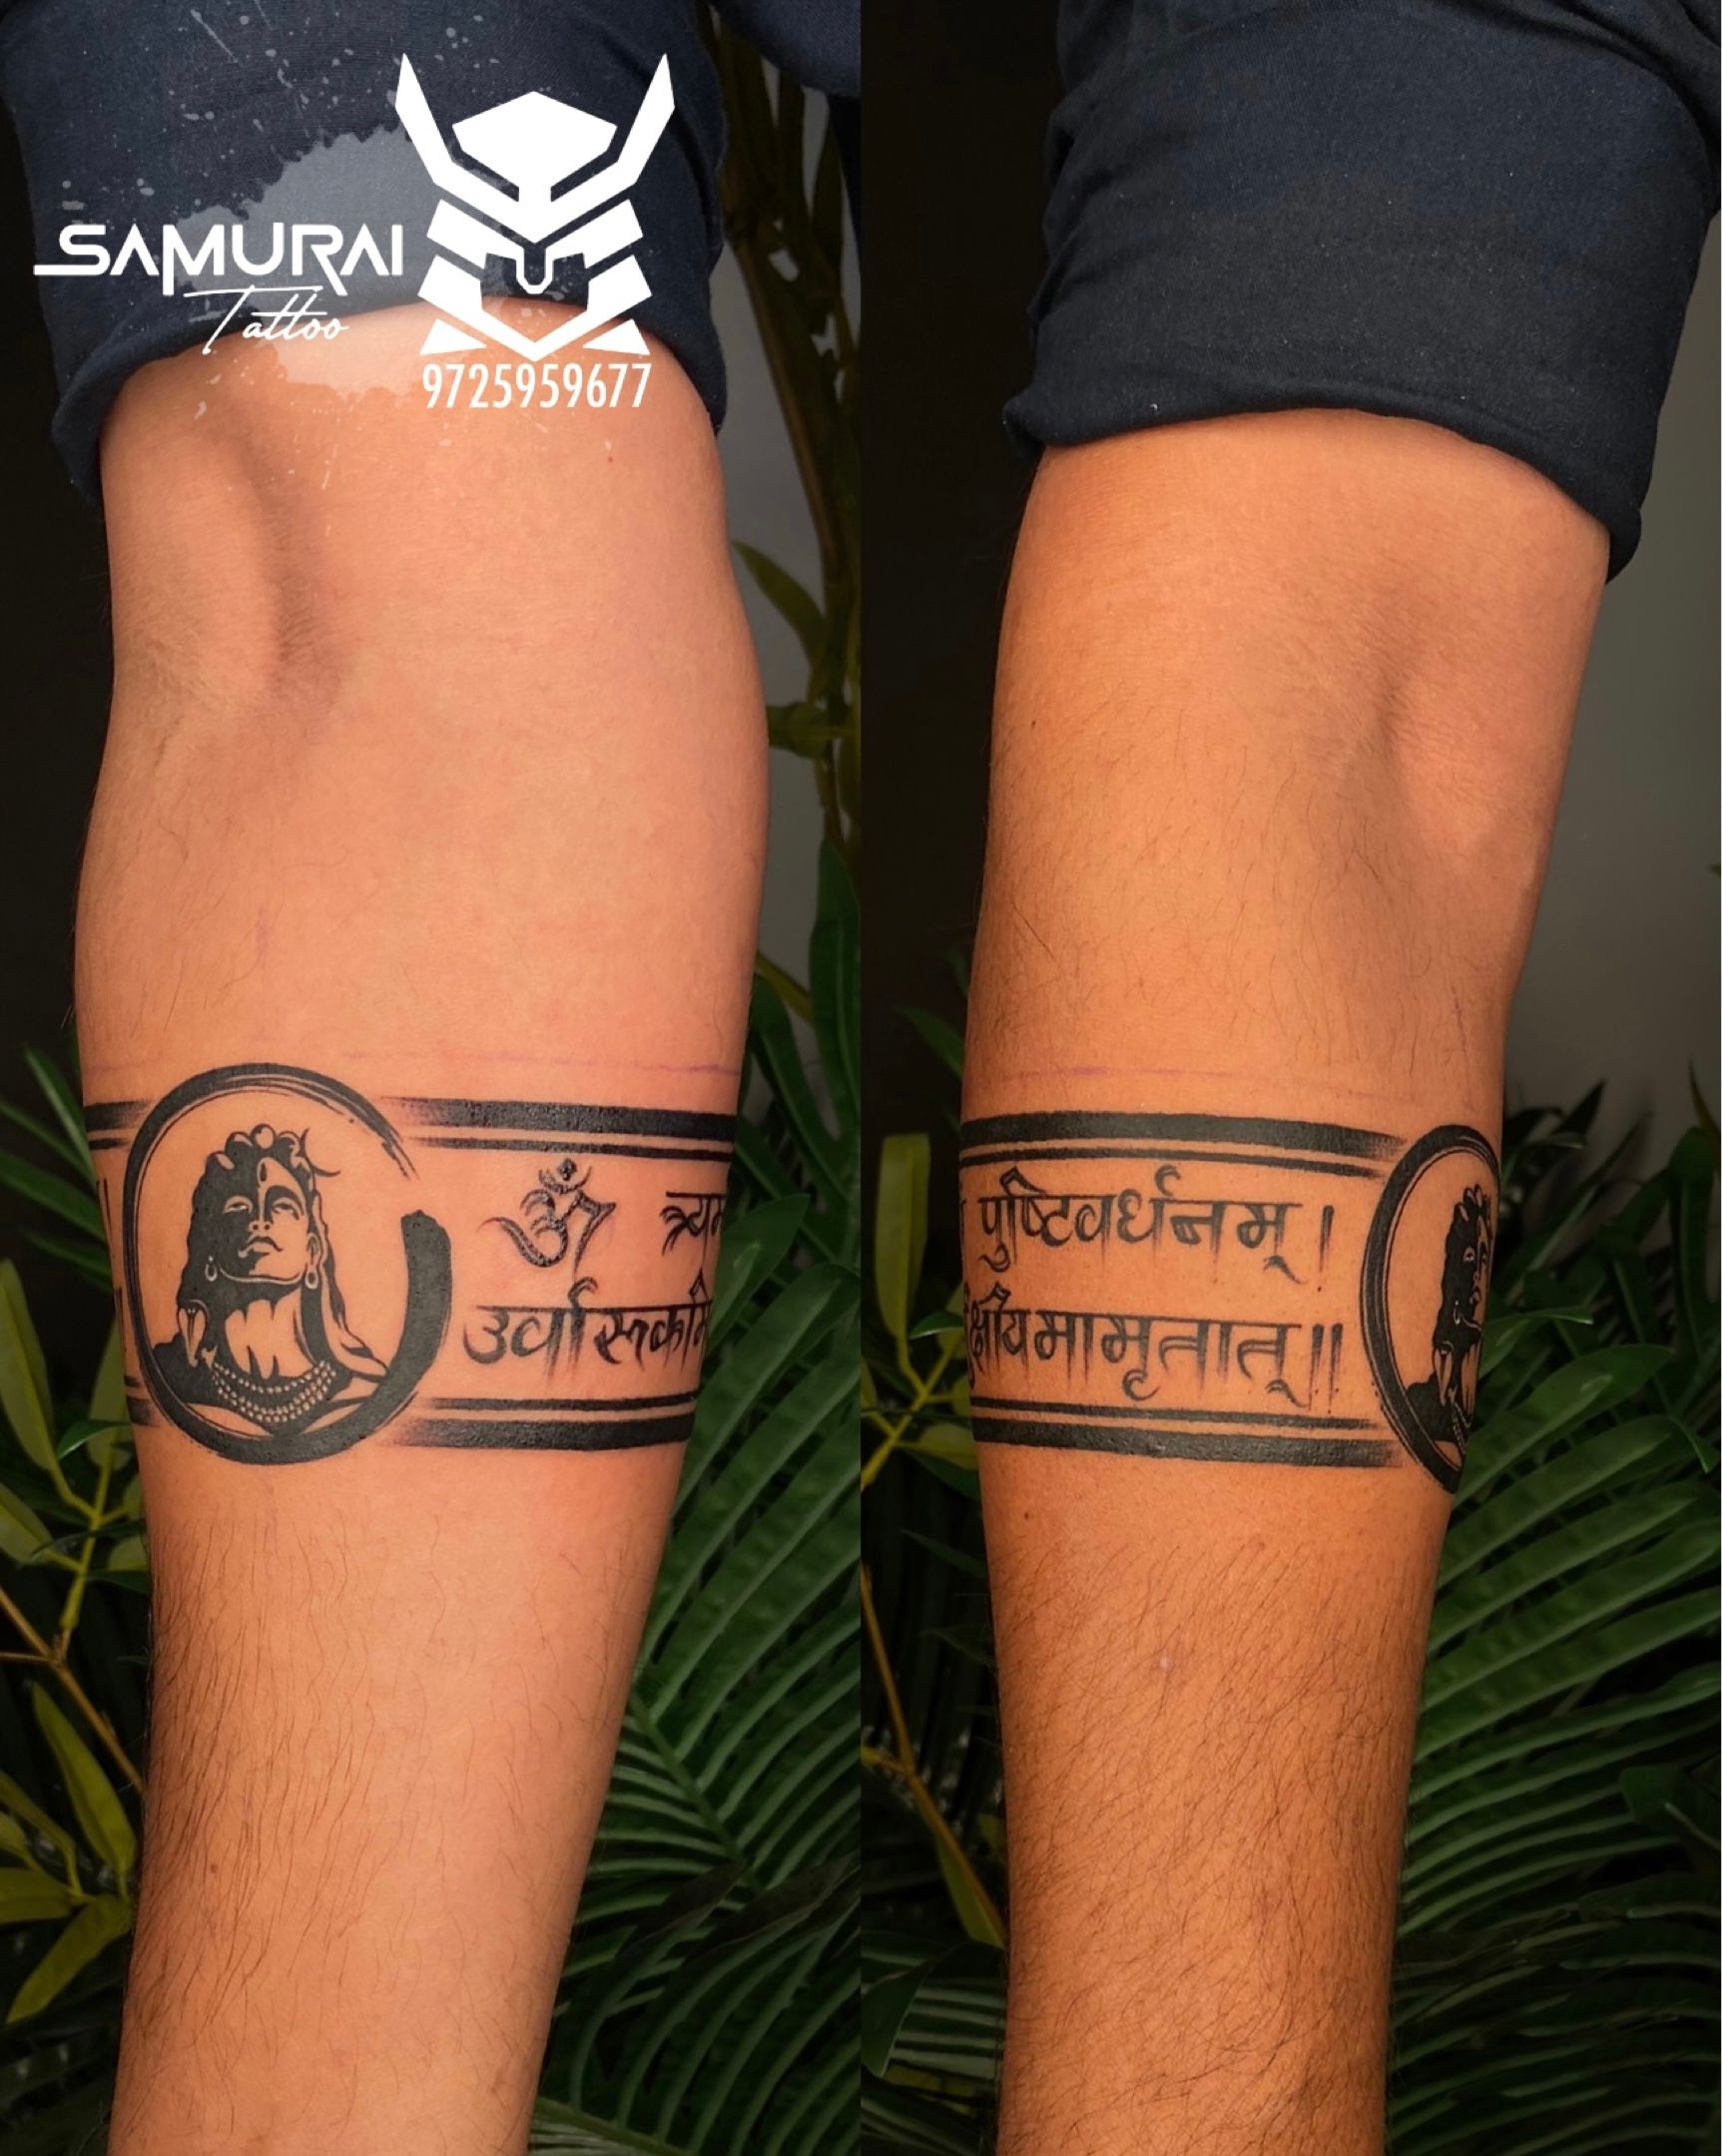 voorkoms Indian Army Hand Band Waterproof Temporary Tattoo For Boys  Girls  Special on independence day Buy Online at Best Price in Egypt  Souq is  now Amazoneg